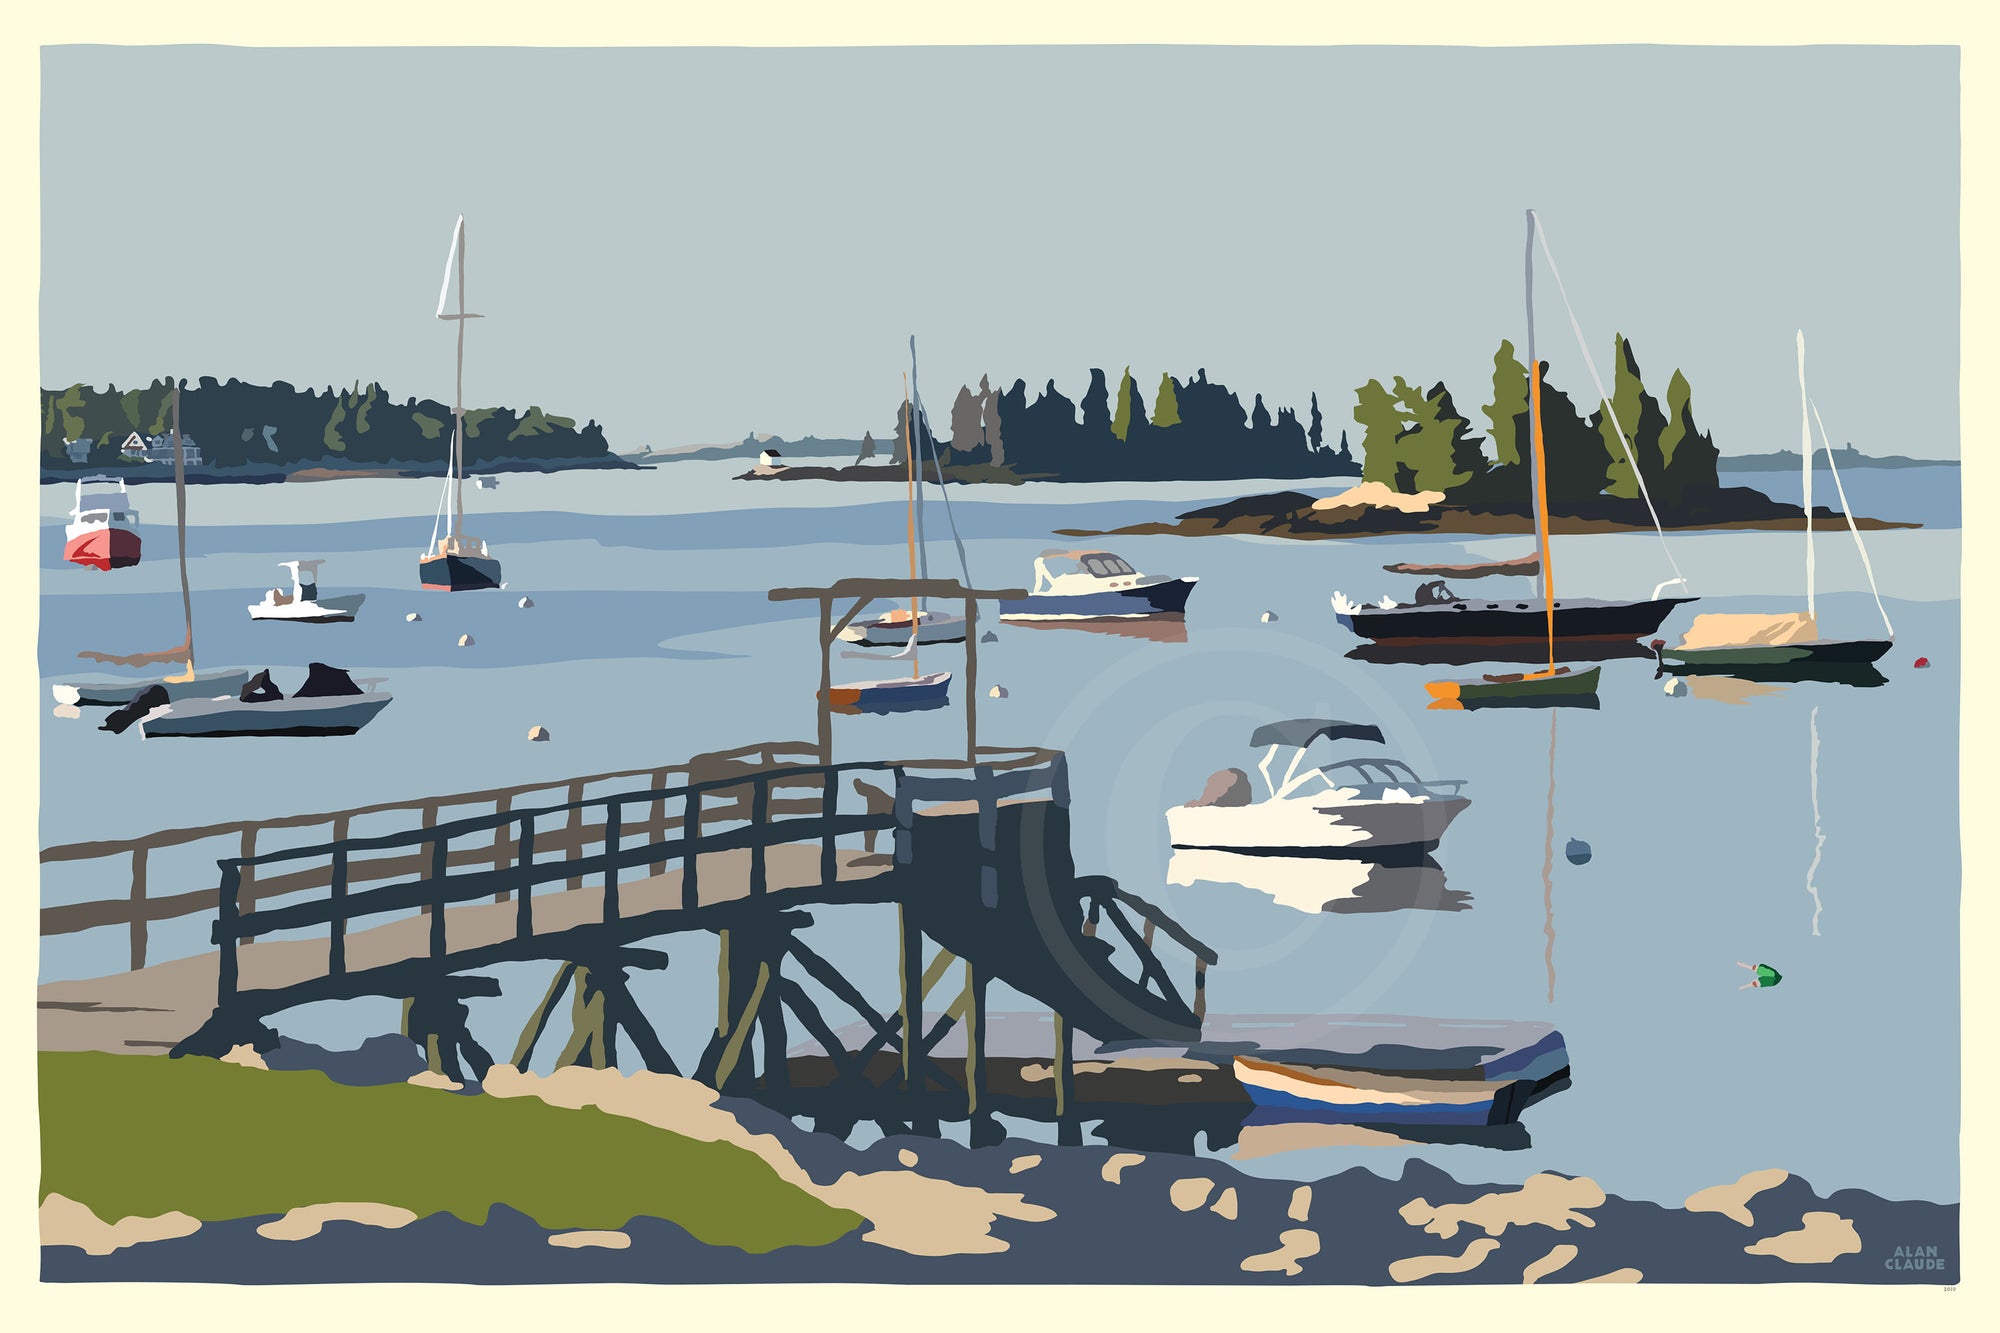 Sailboats in Boothbay Harbor Art Print 24" x 36" Wall Poster By Alan Claude - Maine